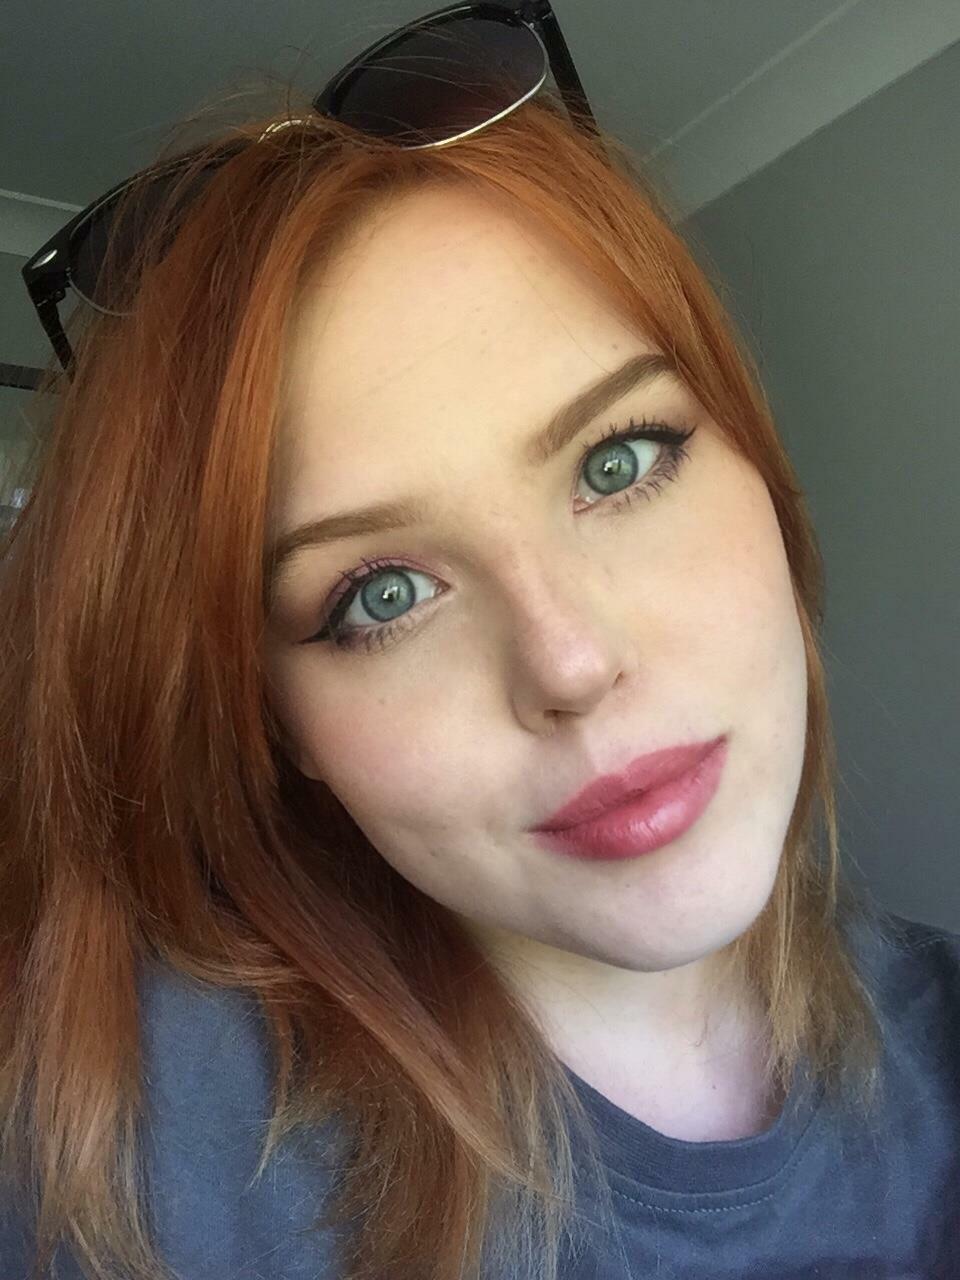 The Face Collector Redhead Beauty I Was Told To Post This Selfie